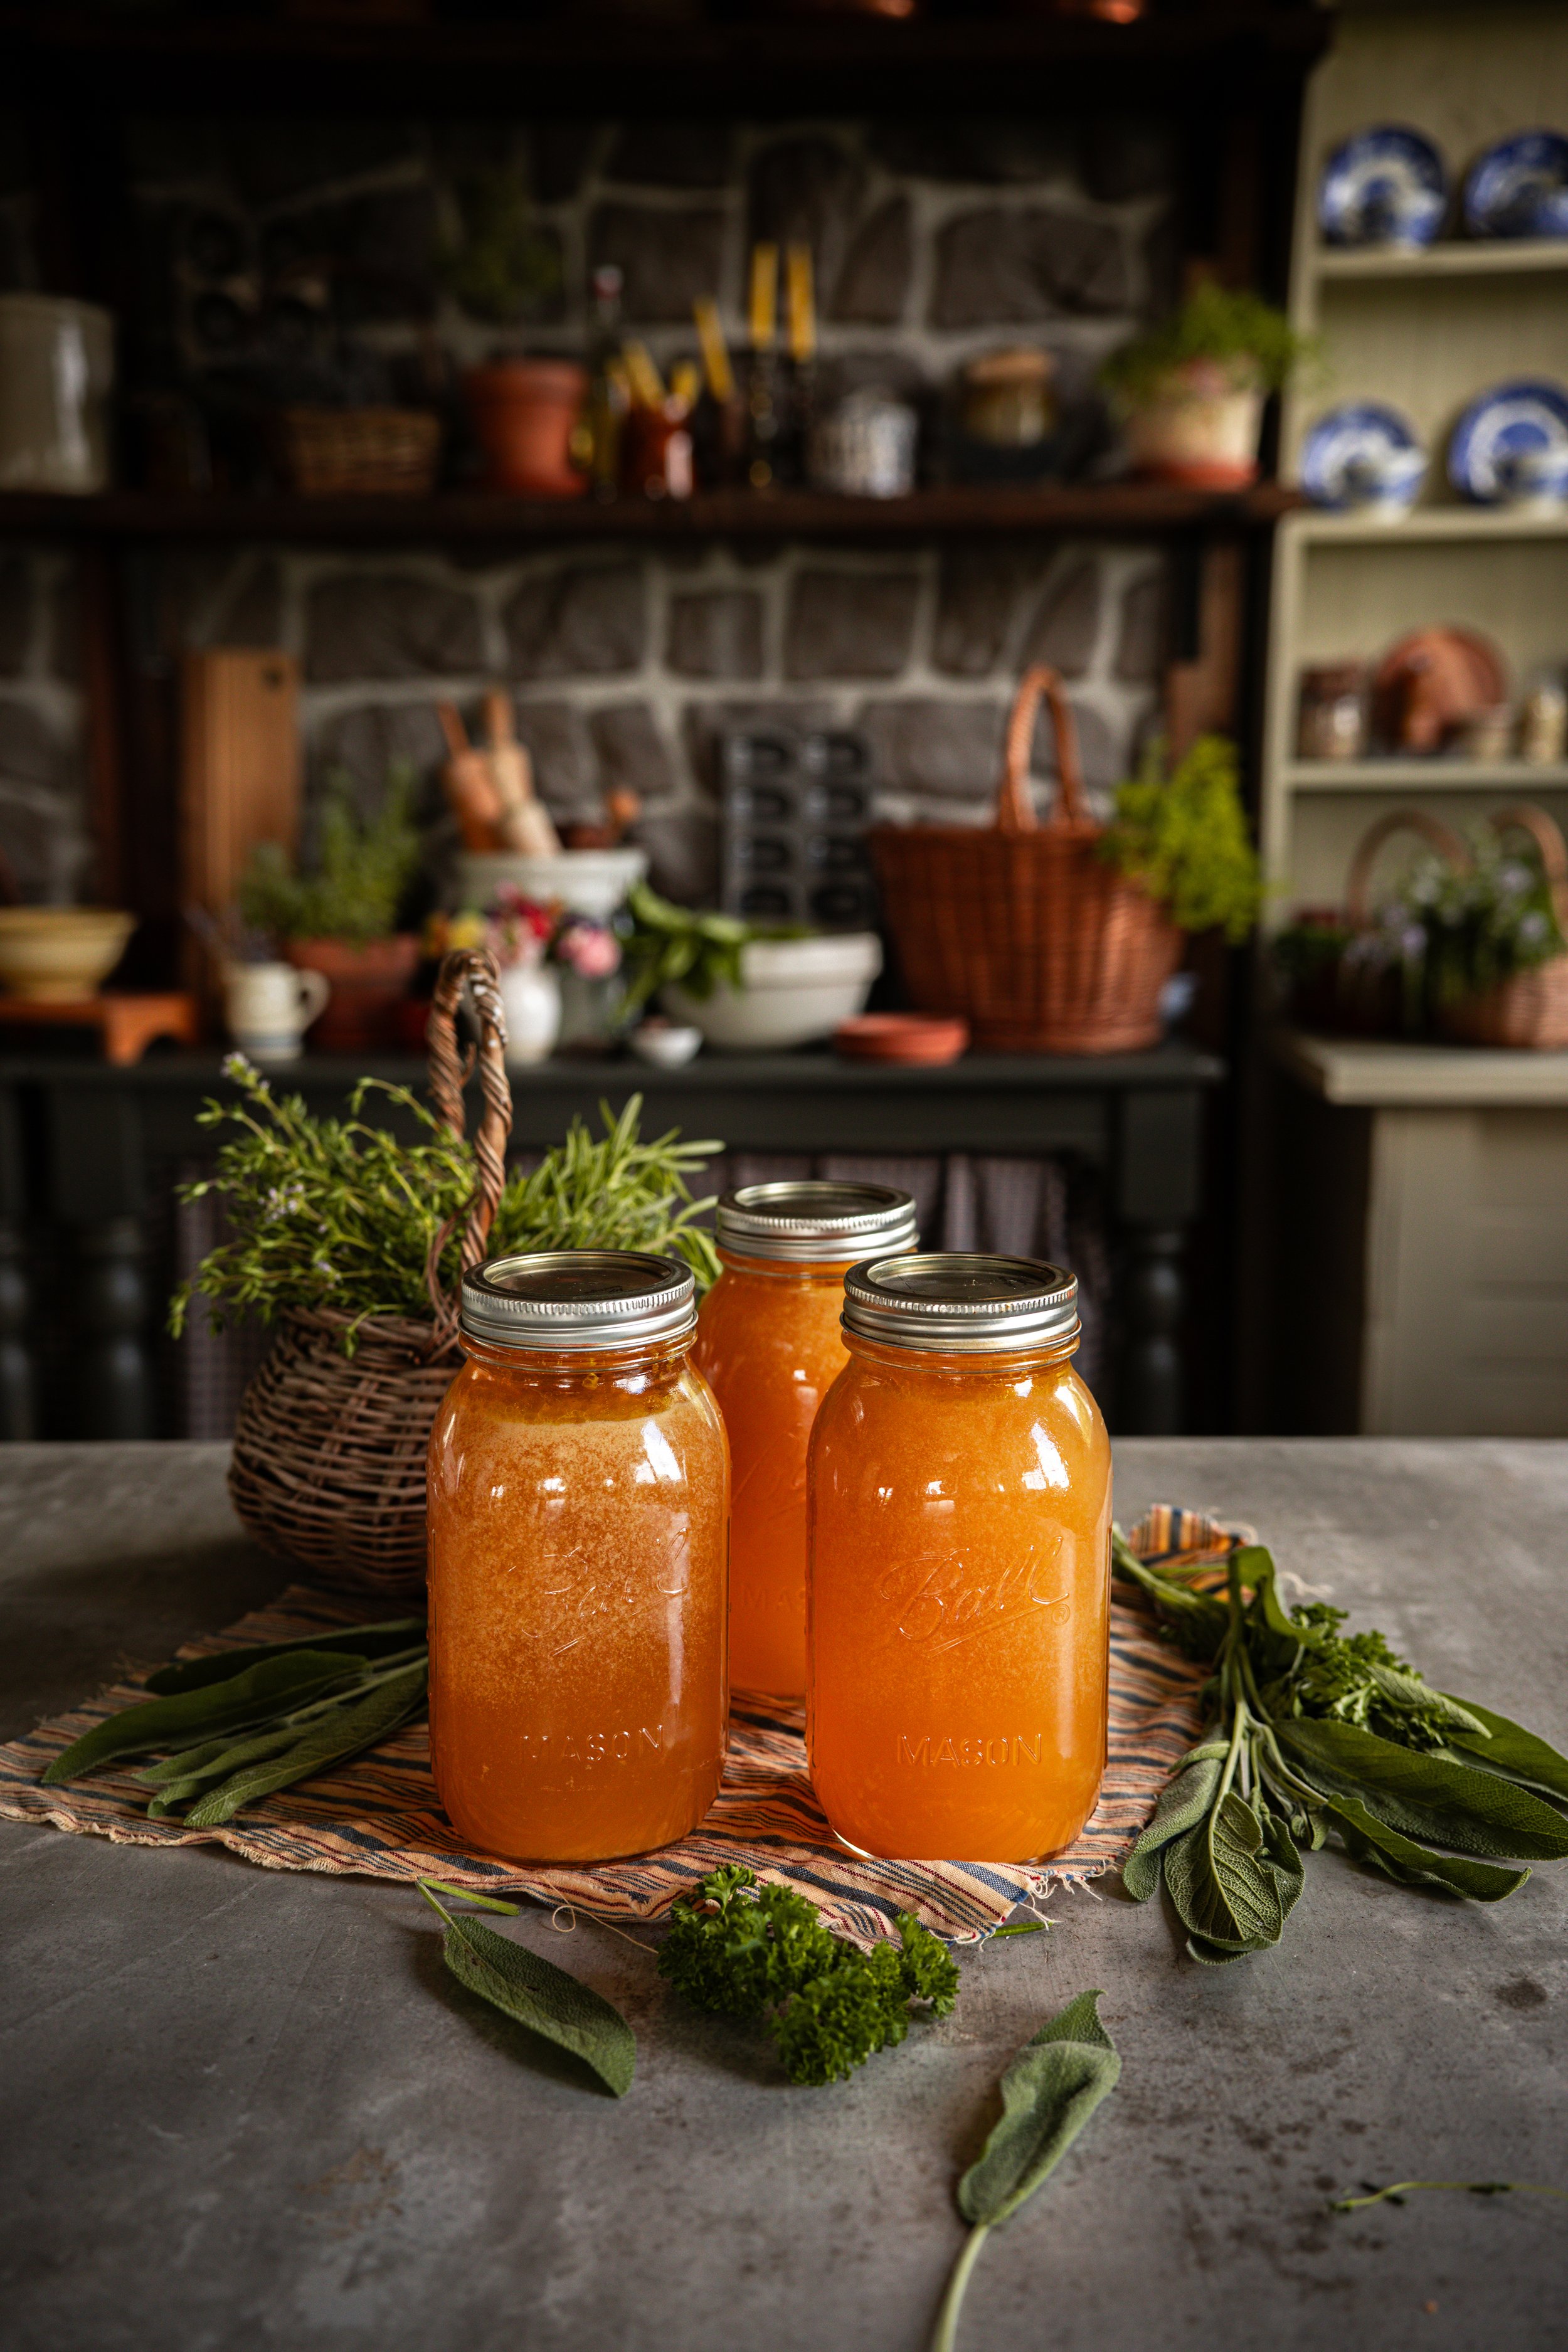 How to Preserve Soup Stock by Freezing or Canning